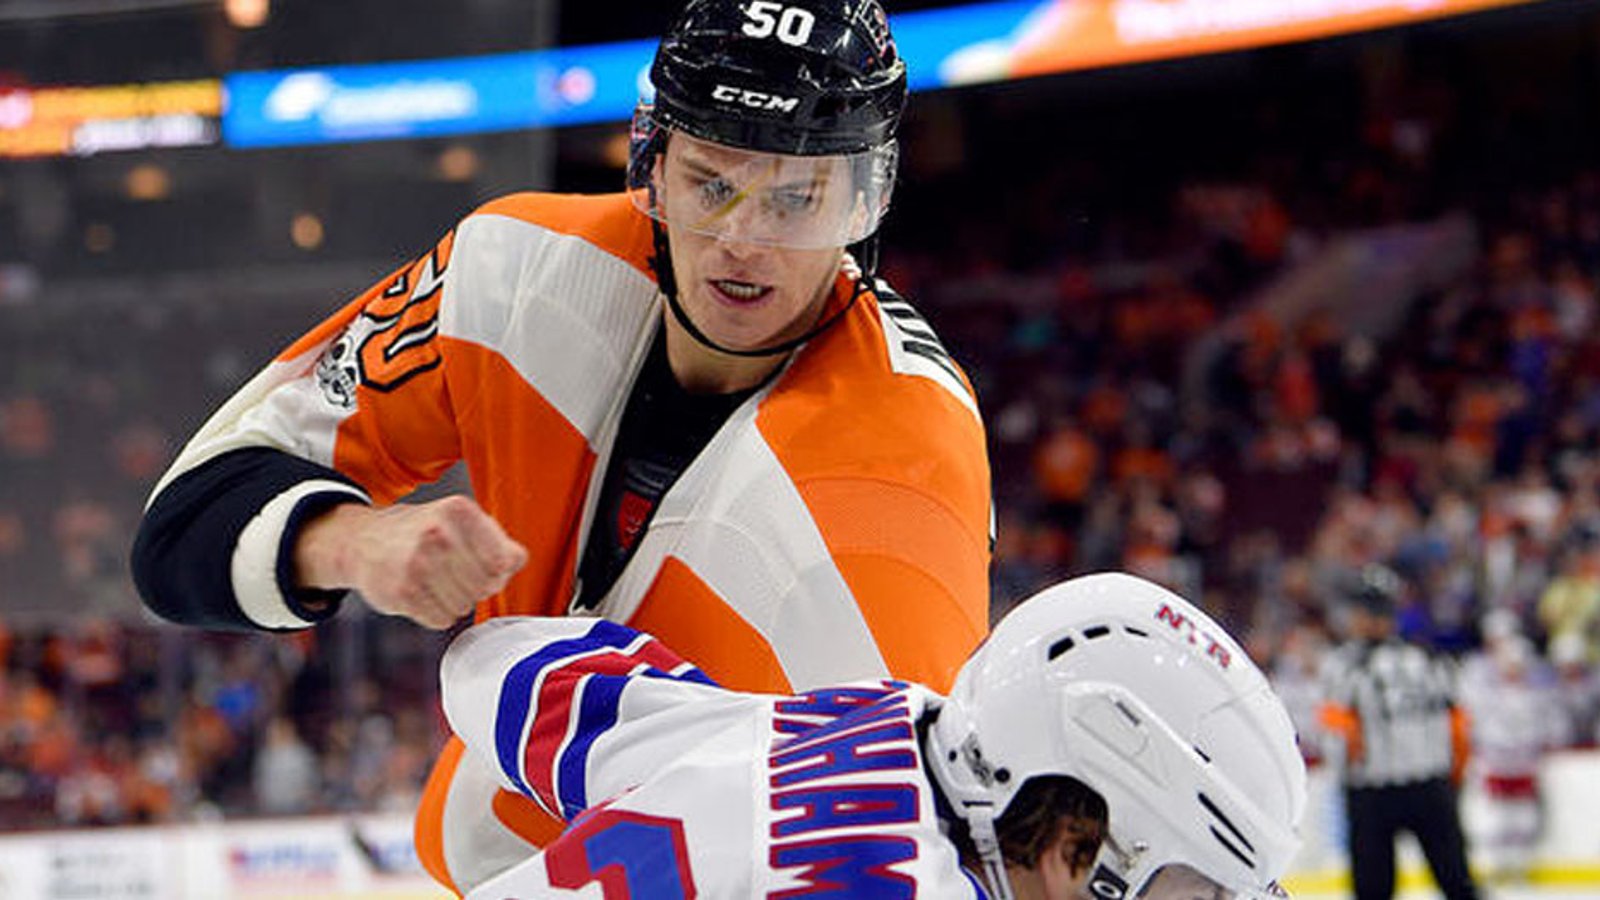 Flyers' Sam Morin ruled out for the season after brutal knee injury